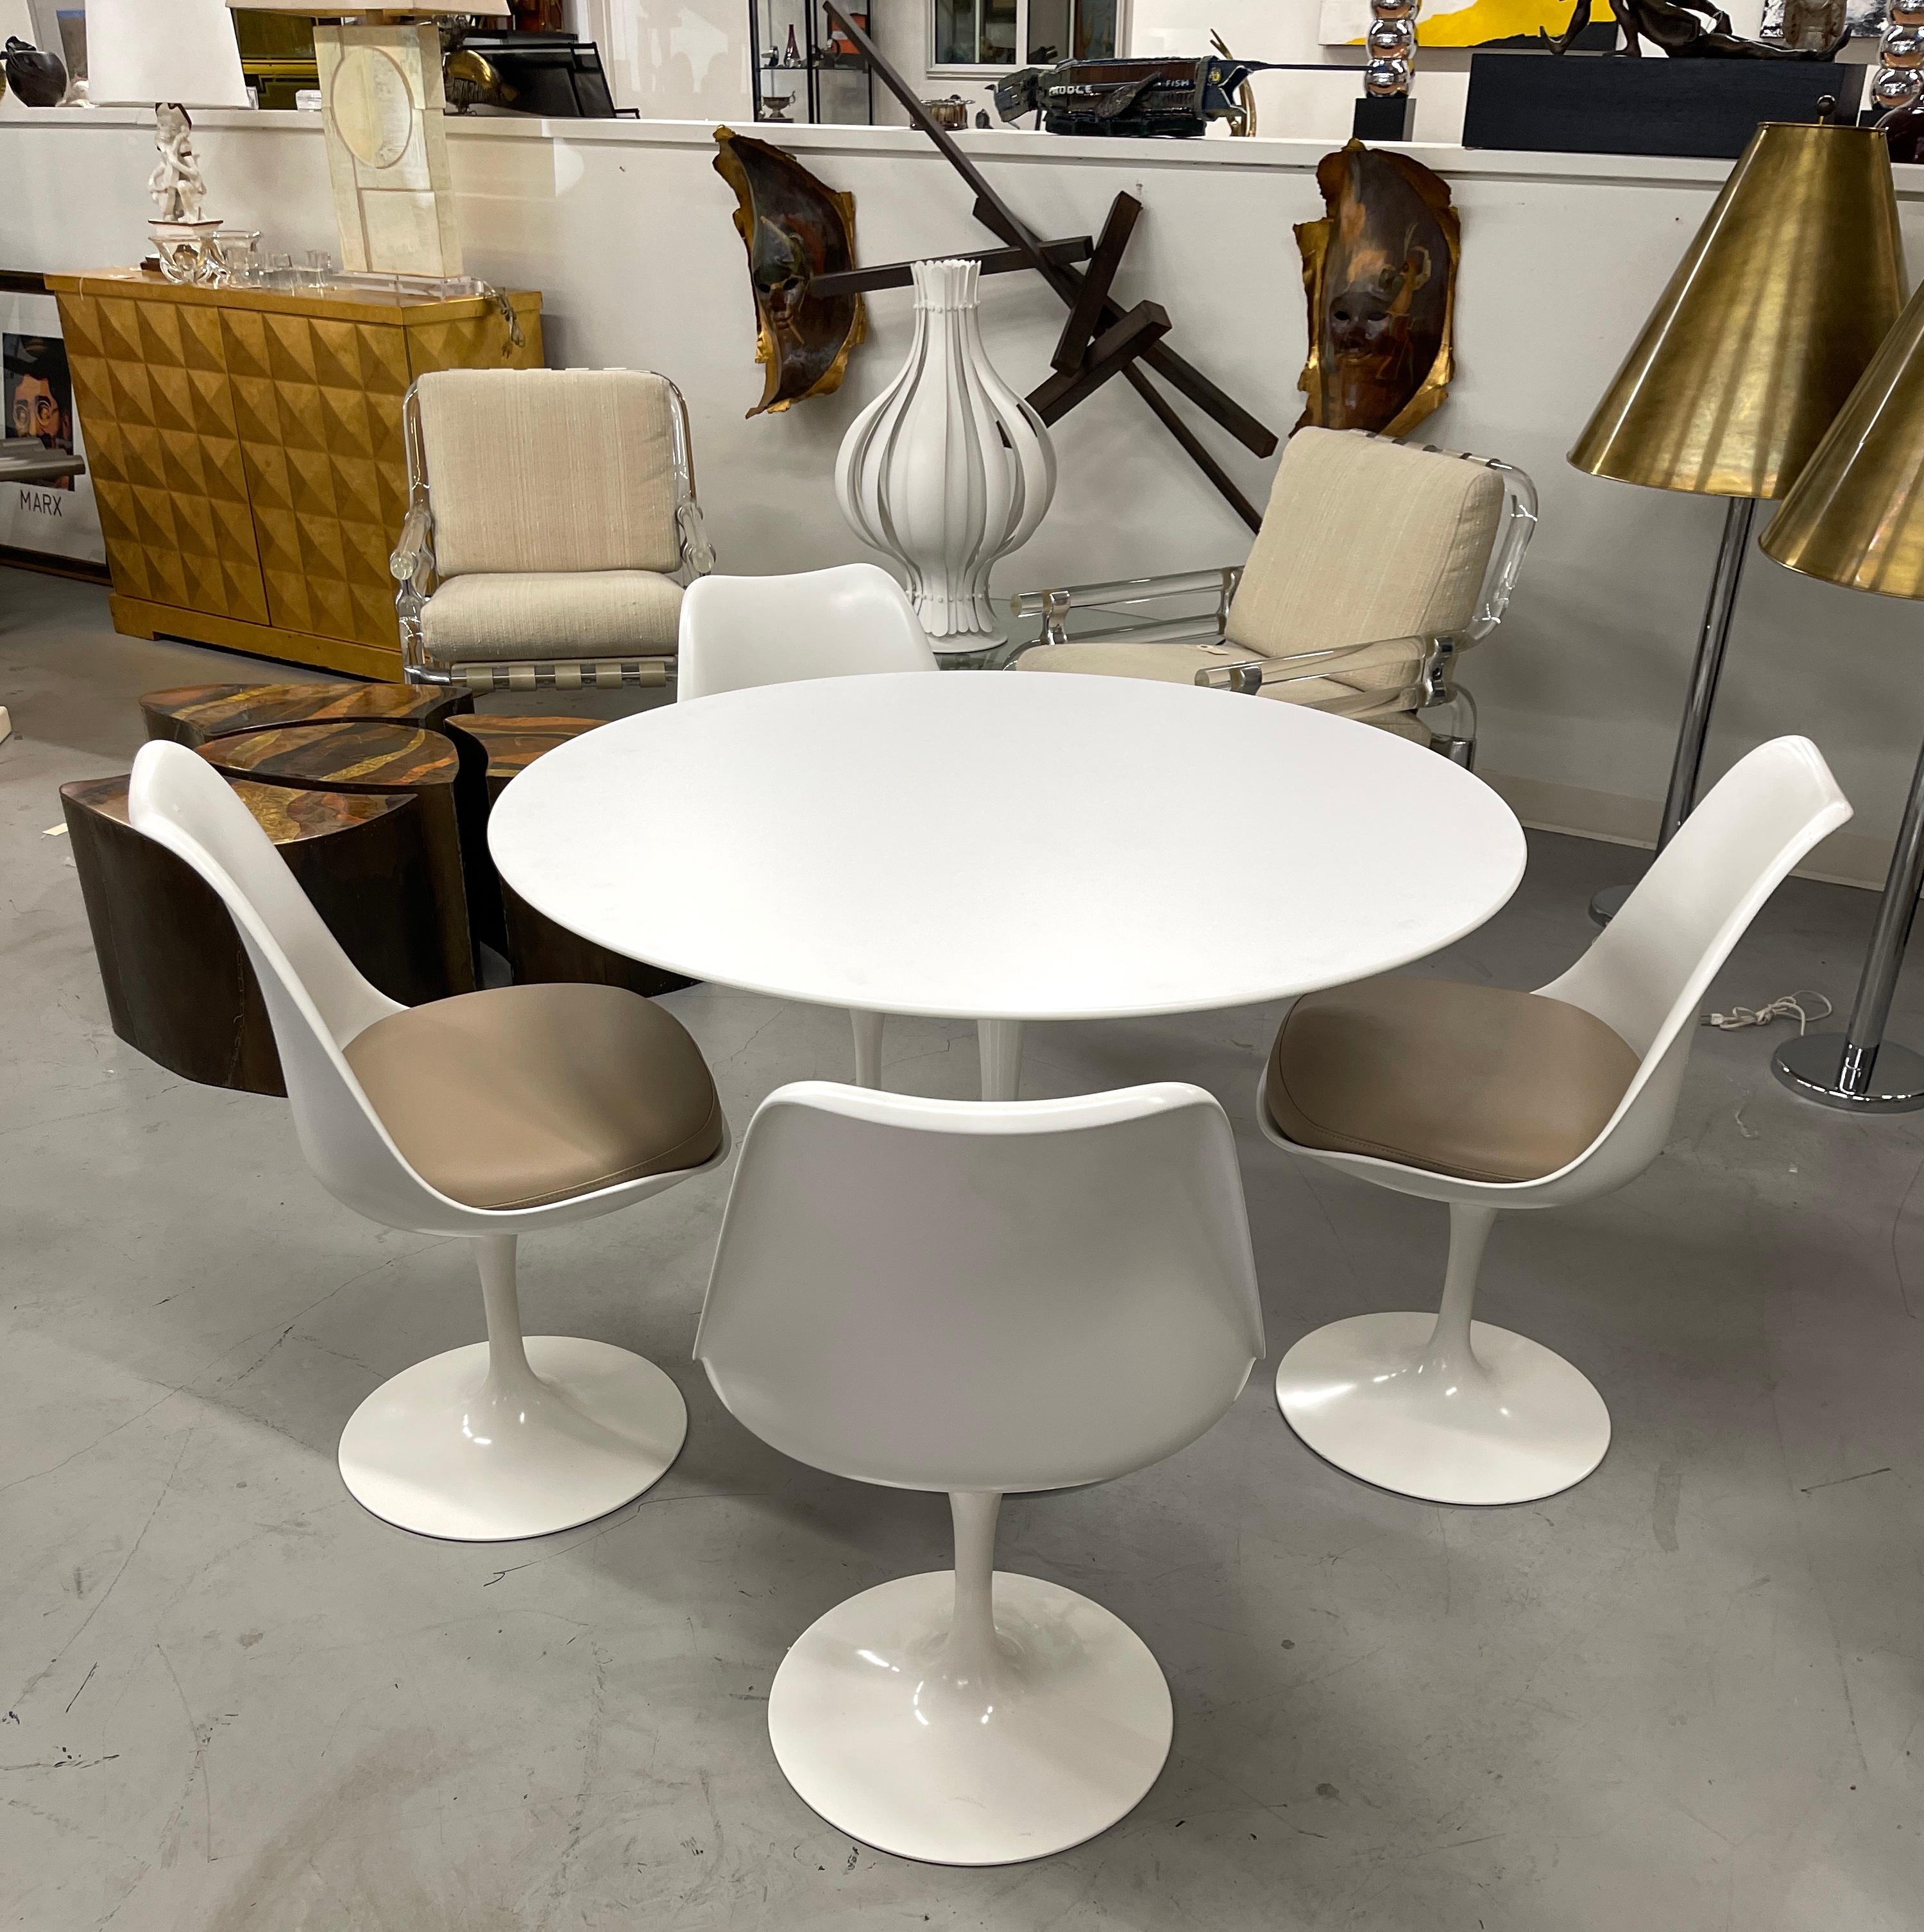 American Eero Saarinen for Knoll Tulip Dining Table and Chairs